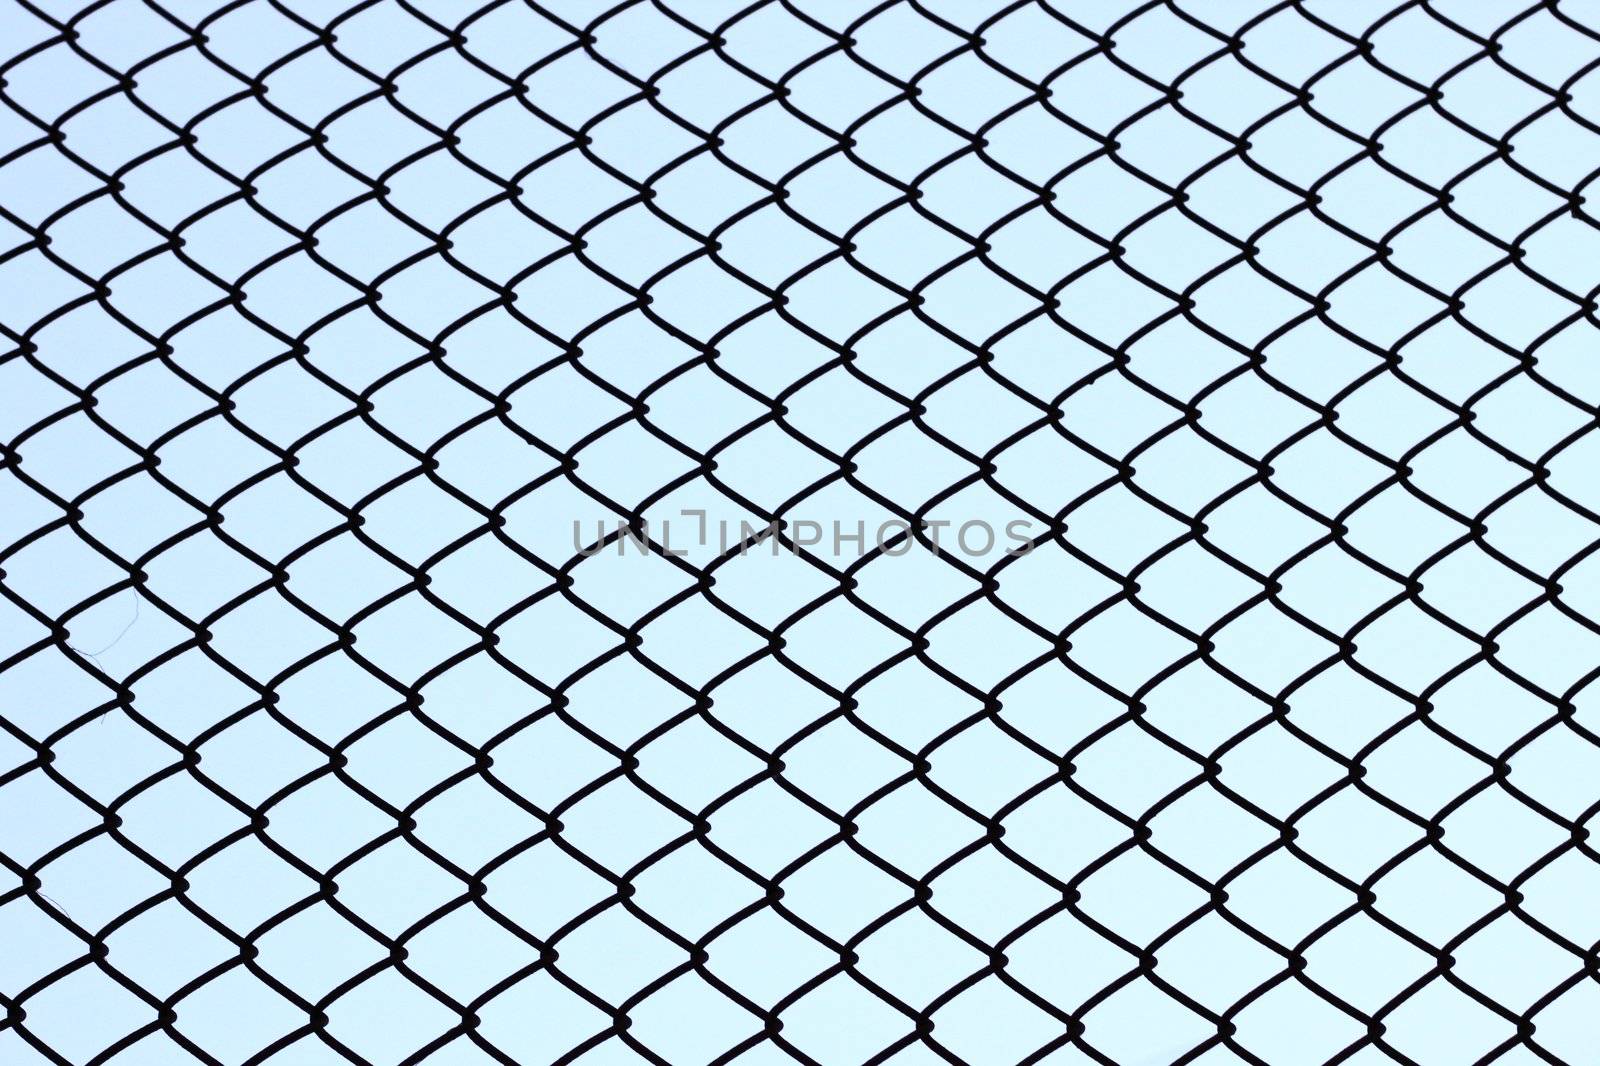 Wire fence by nuchylee